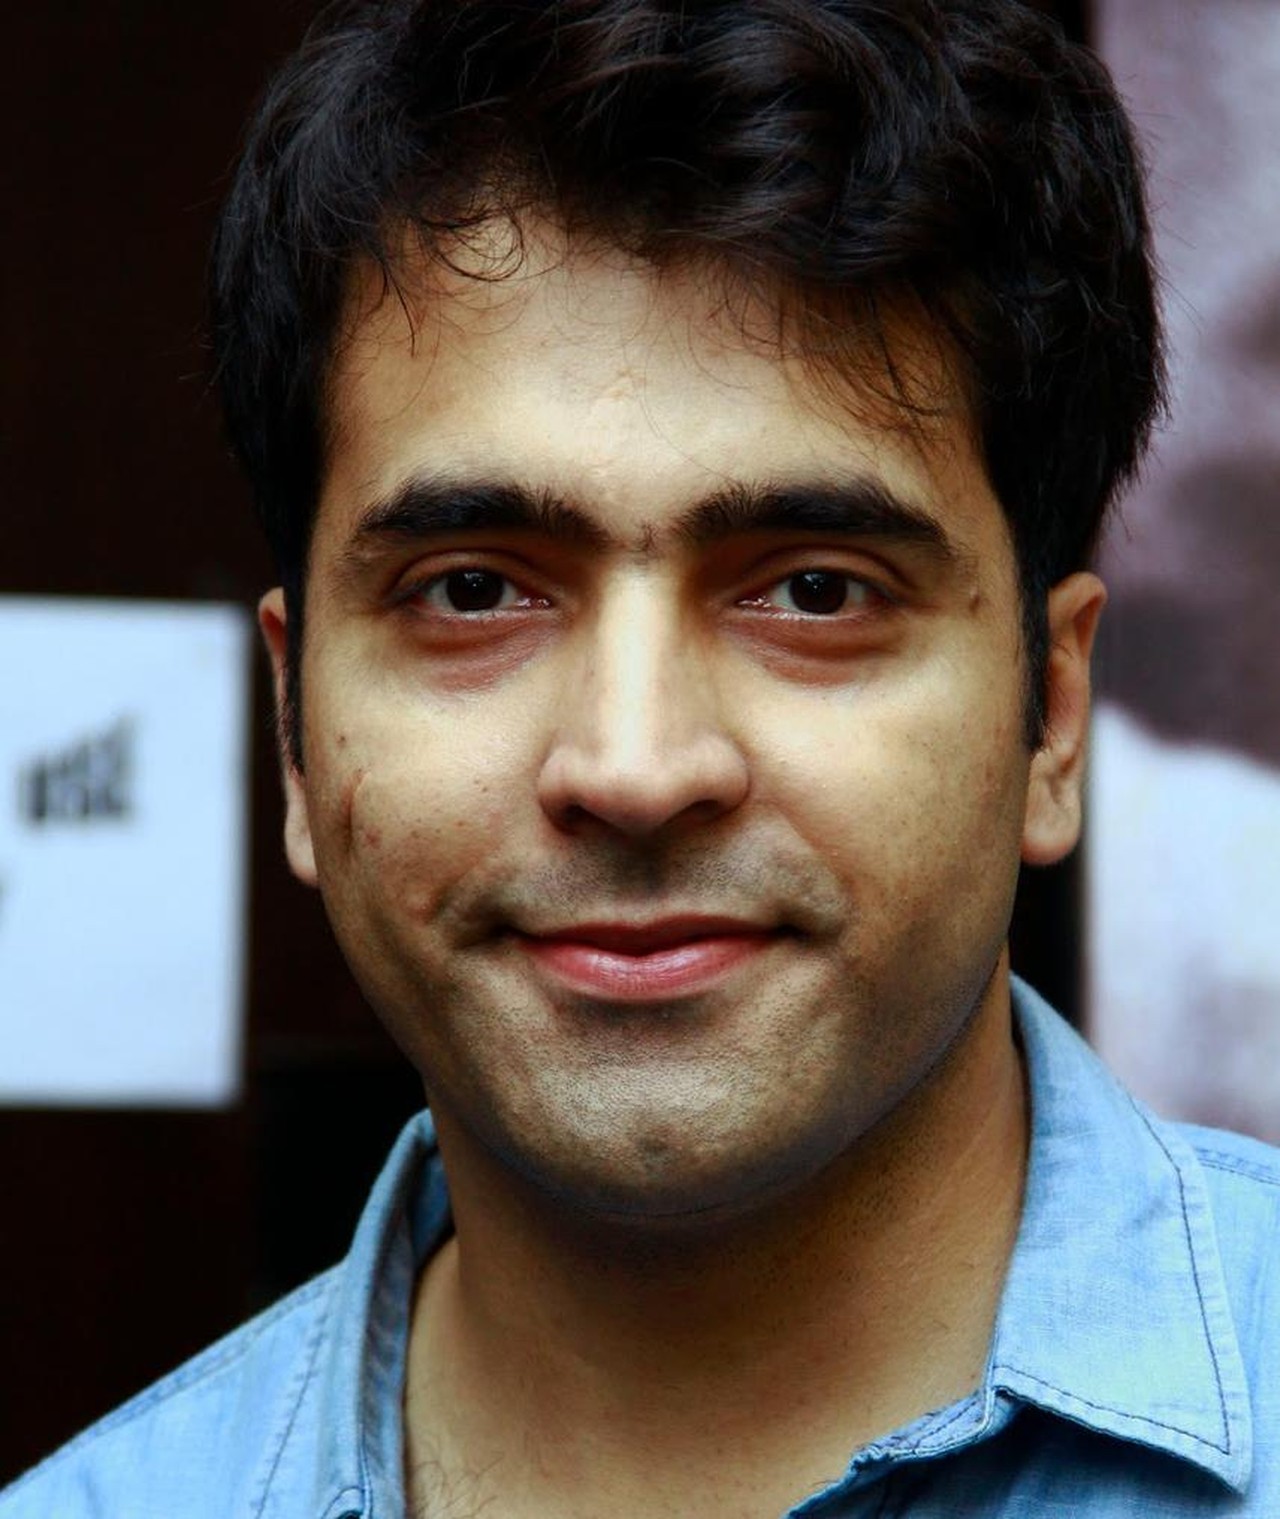 BOLLYWOOD ACTRESS HOT Bengali Actor Abir Chatterjee Image Gallery and  Short Biography Bengali Actor Abir Chatterjee Image Gallery and Short  Biography